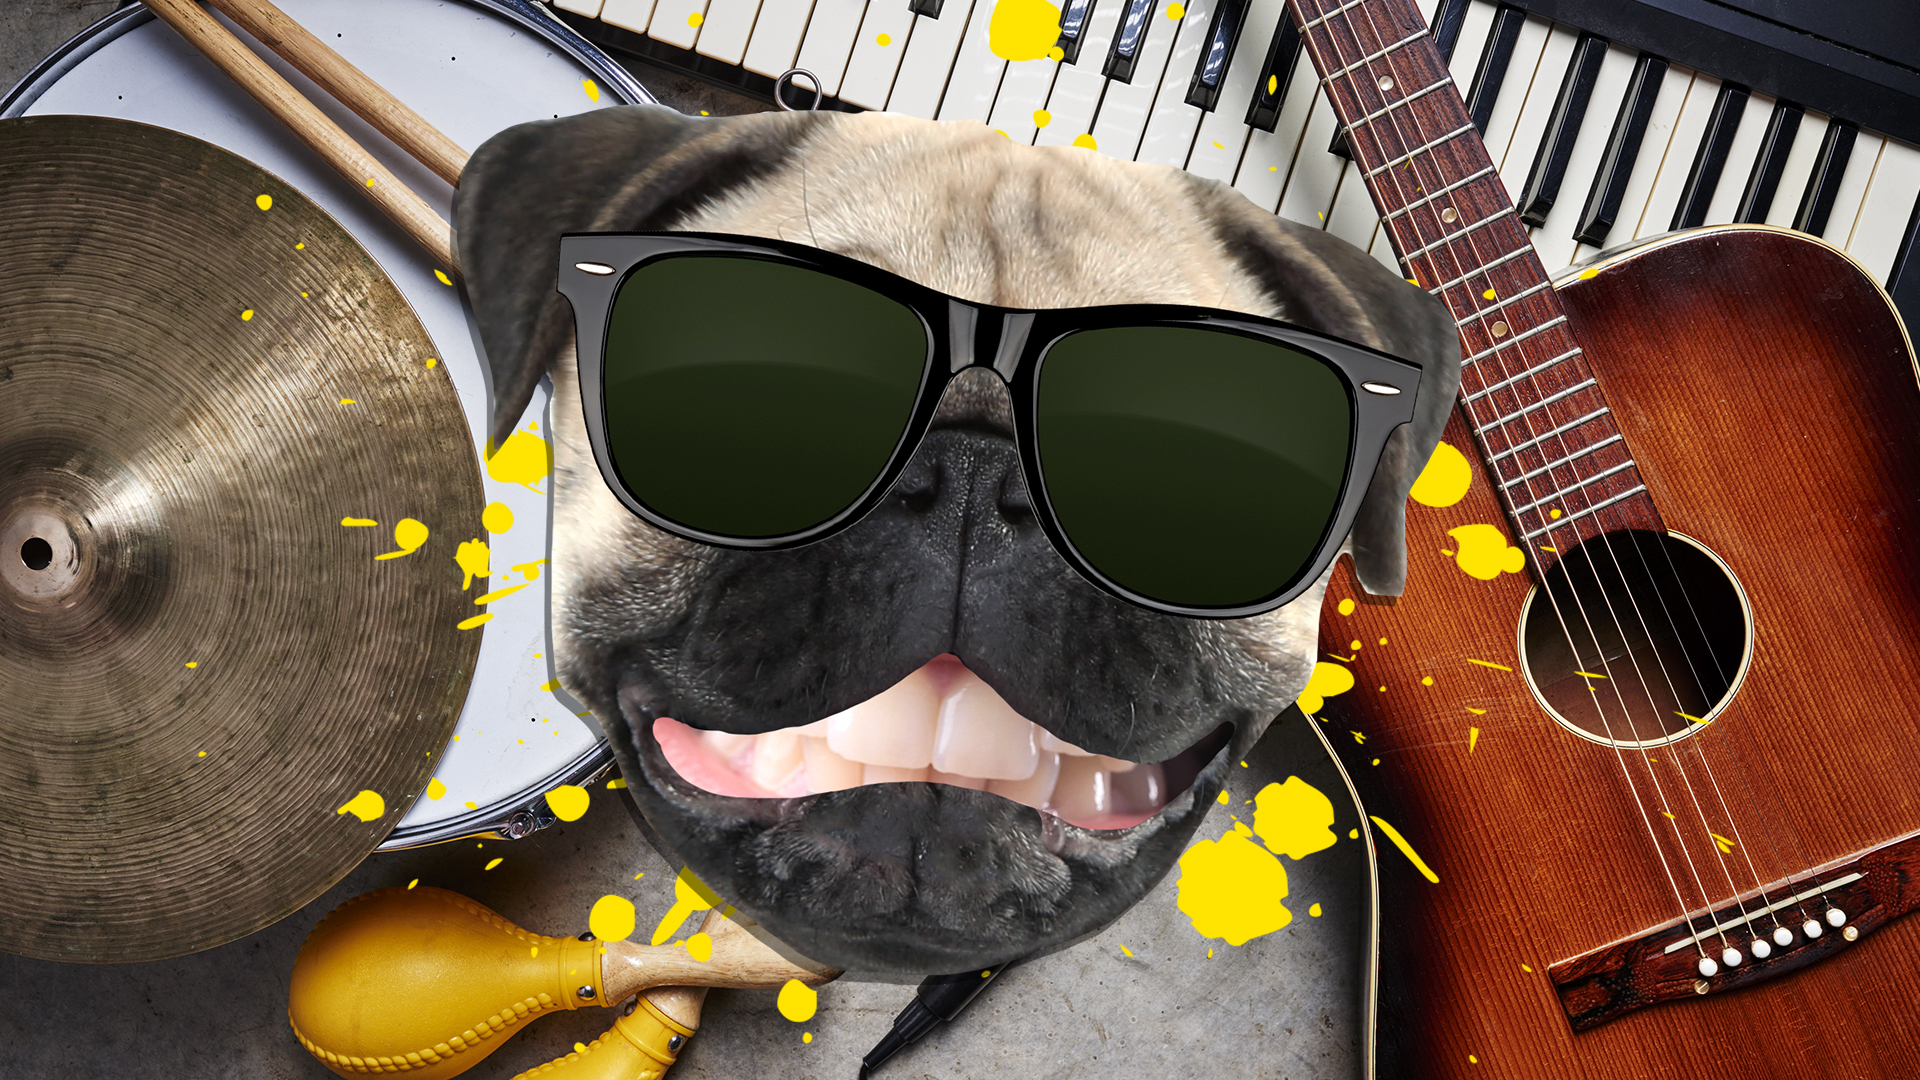 A dog surrounded by musical instruments